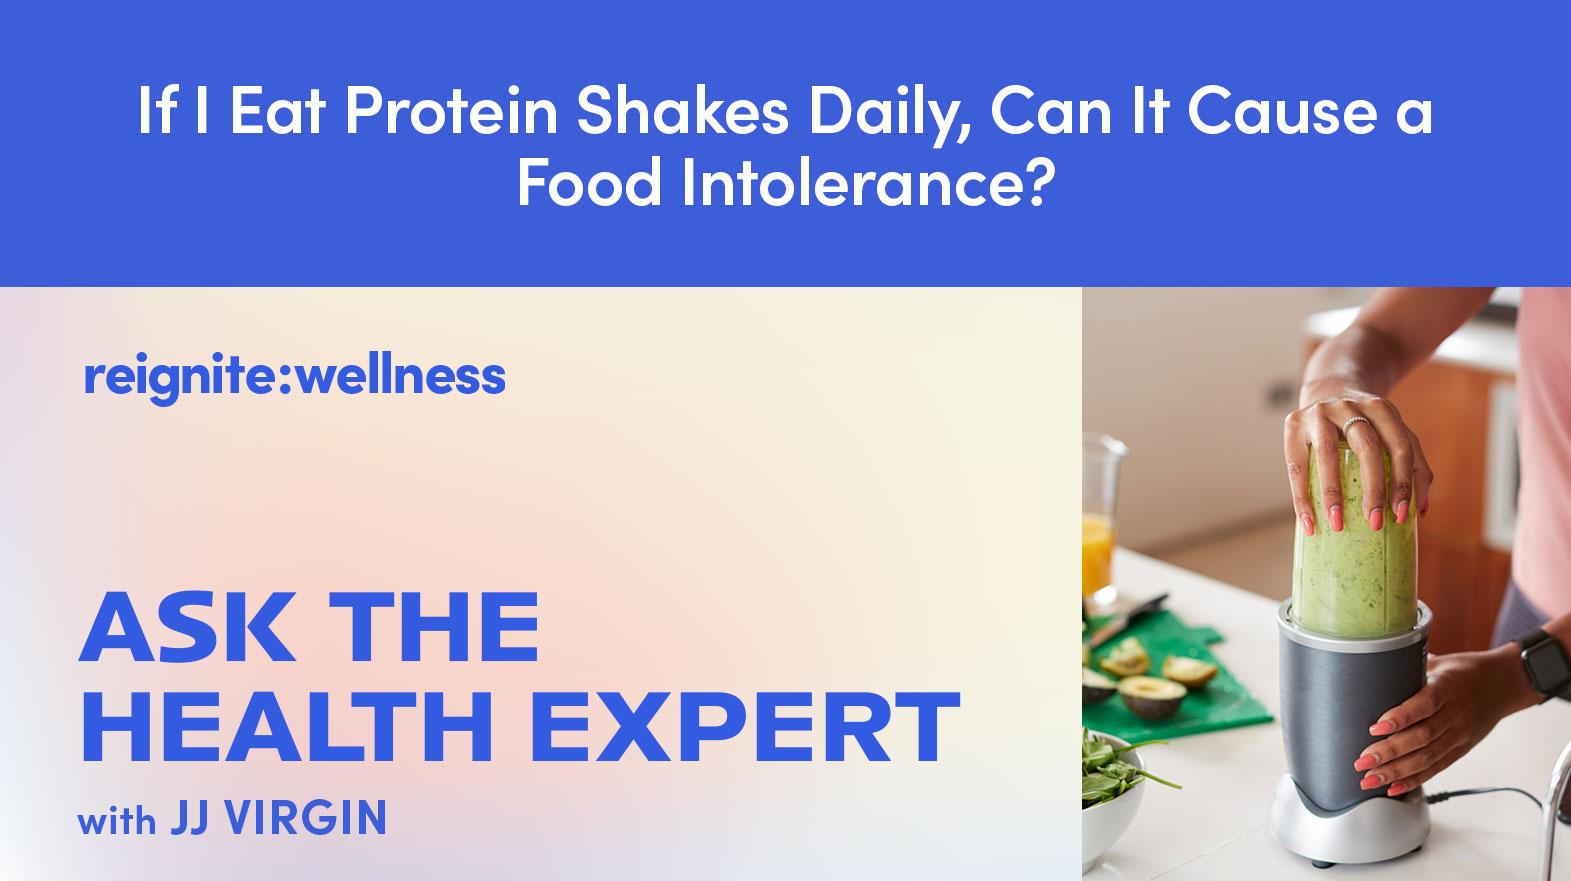 If I Eat Protein Shakes Daily, Can It Cause a Food Intolerance? | Ep. 331